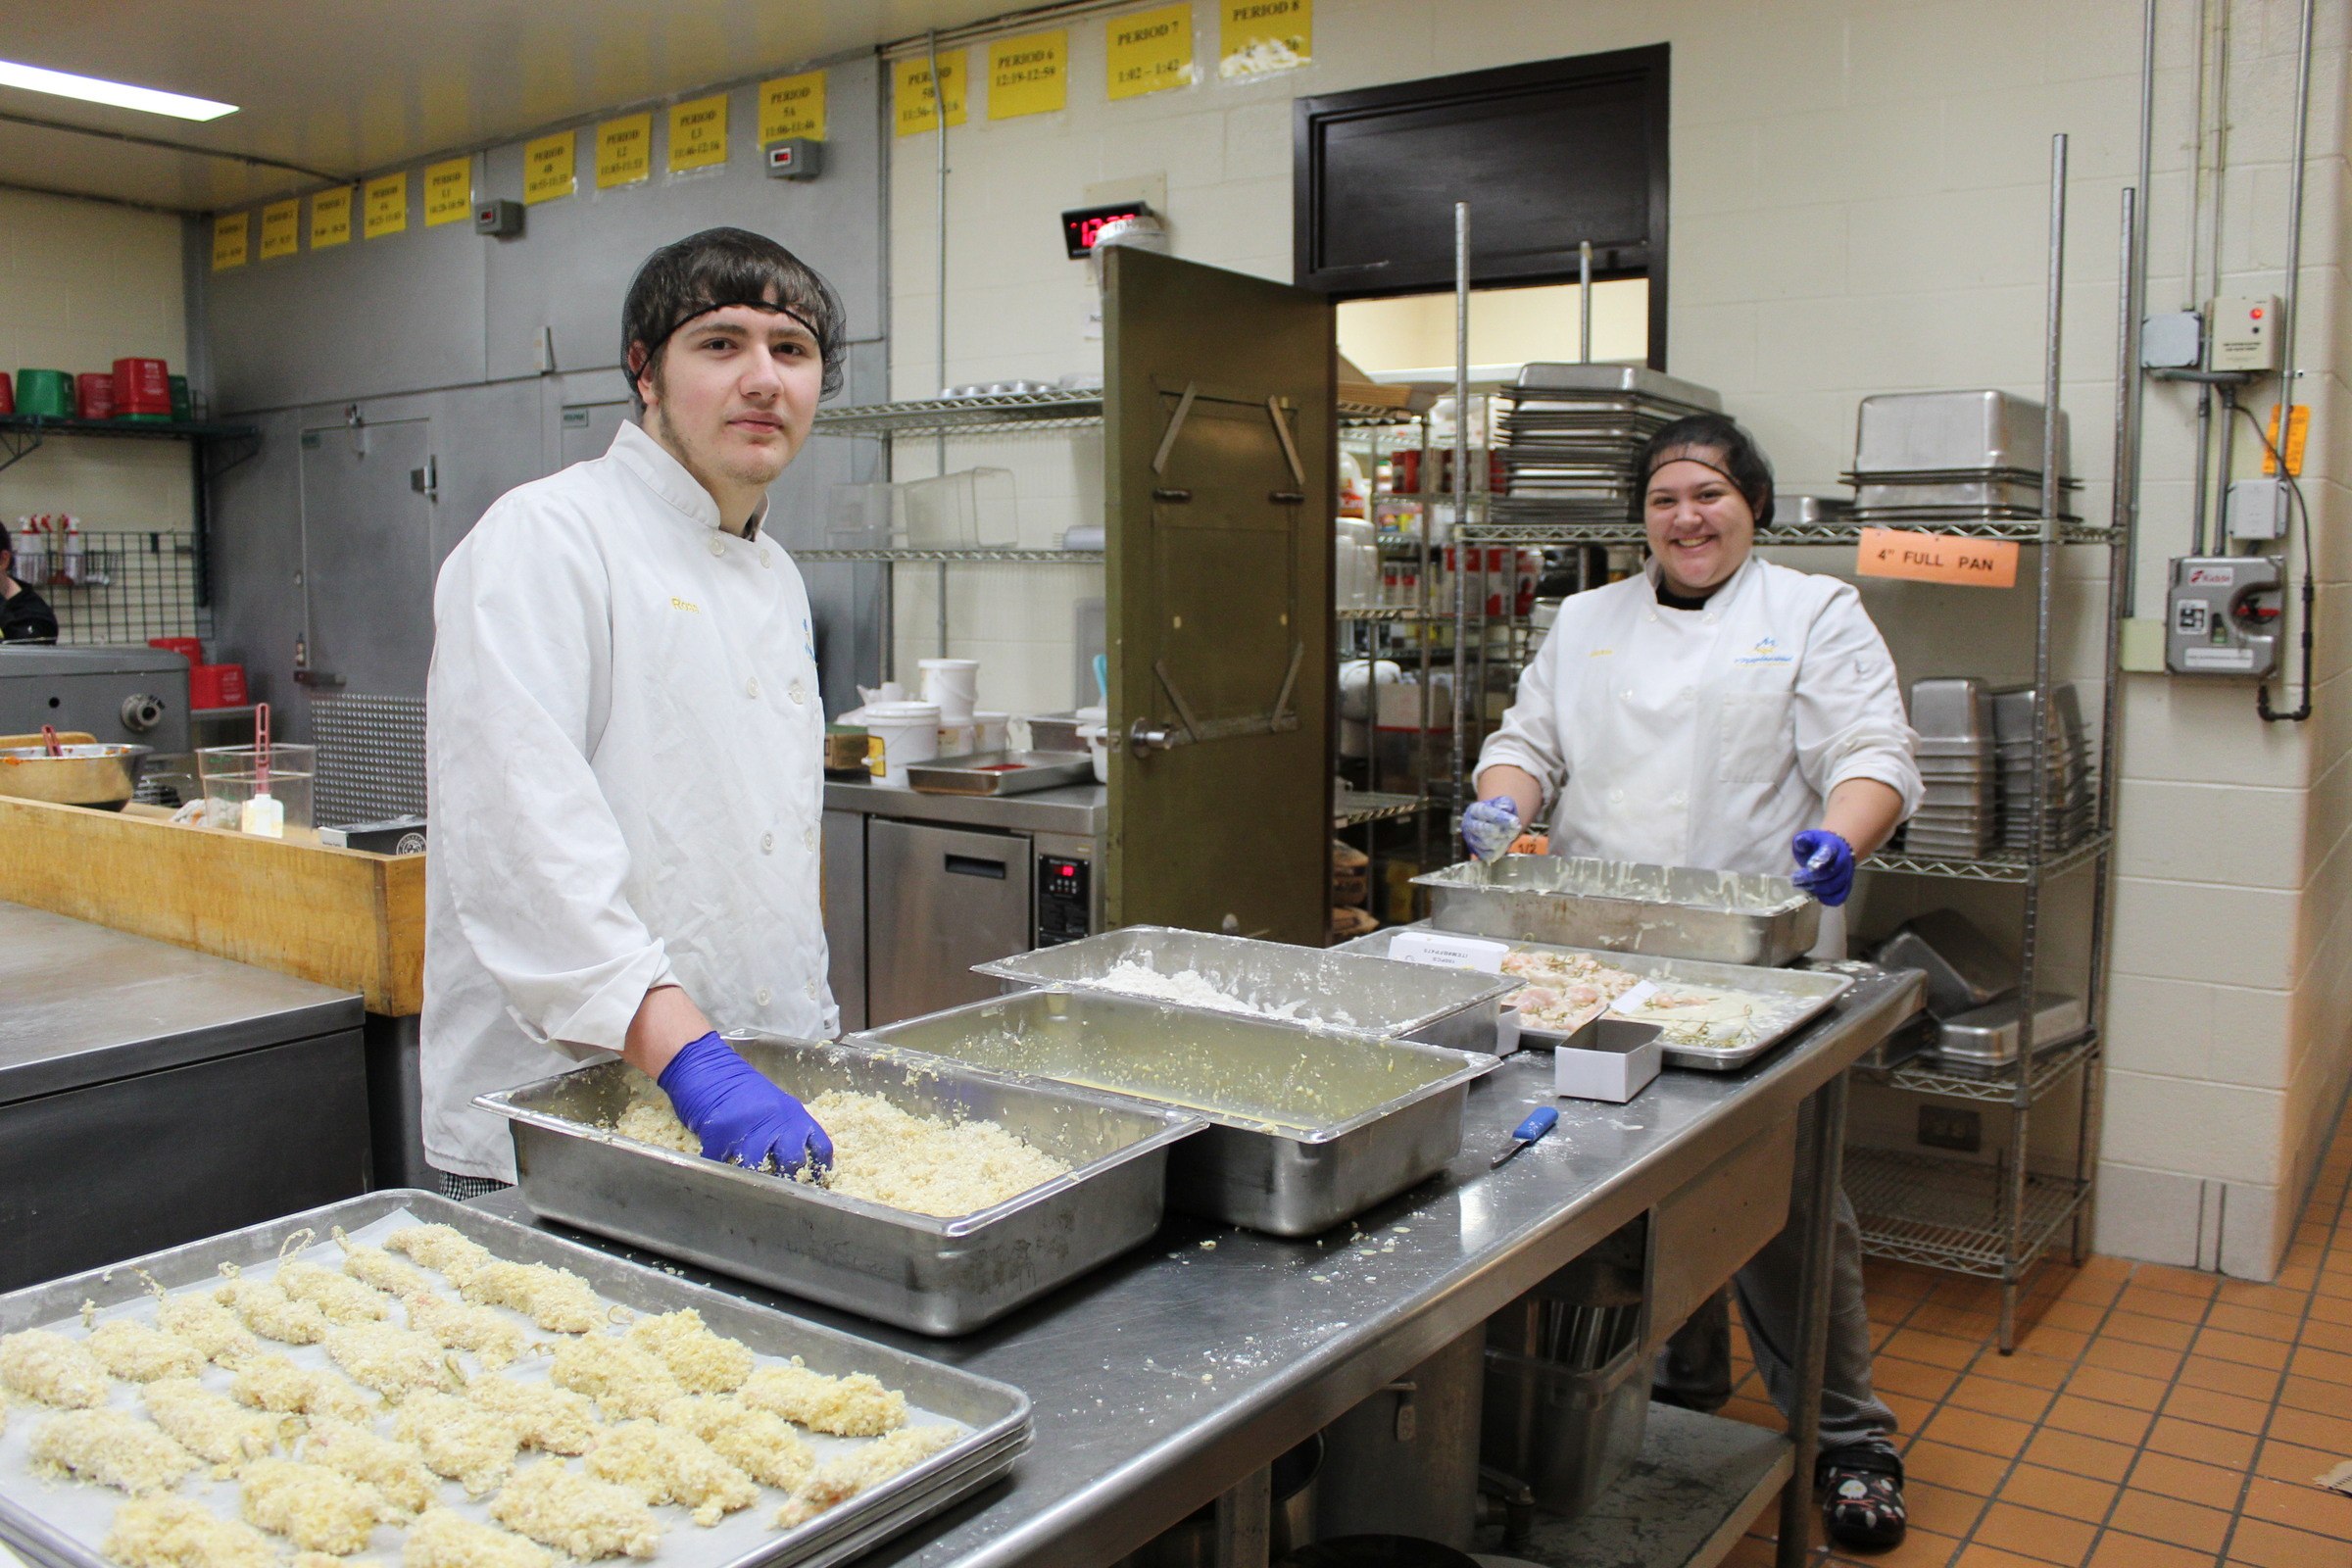 Culinary Students preparing meals